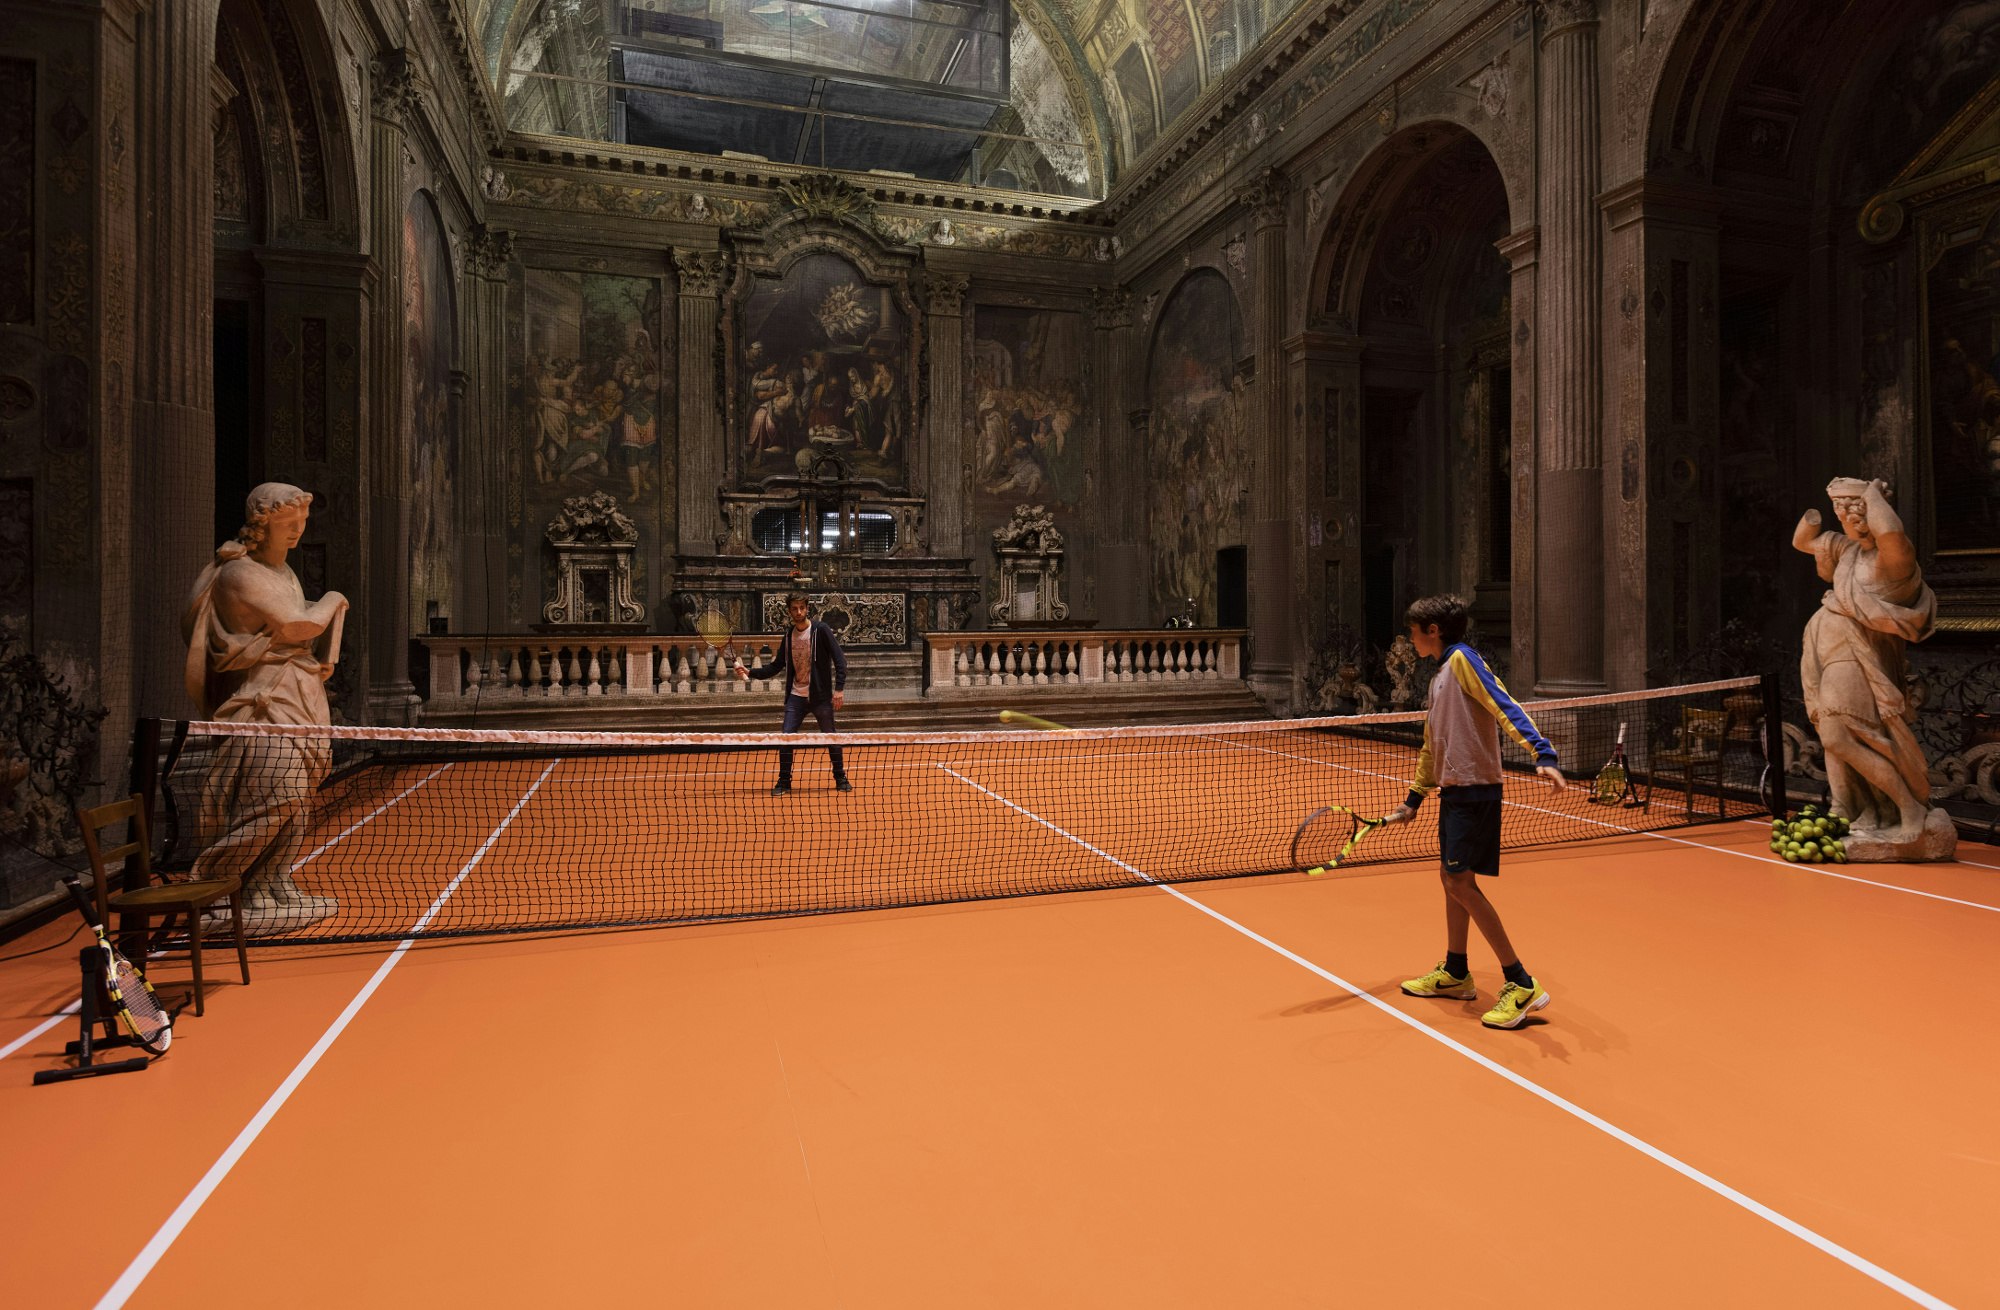 The installation allows visitors to practice their tennis skills inside a unique space.